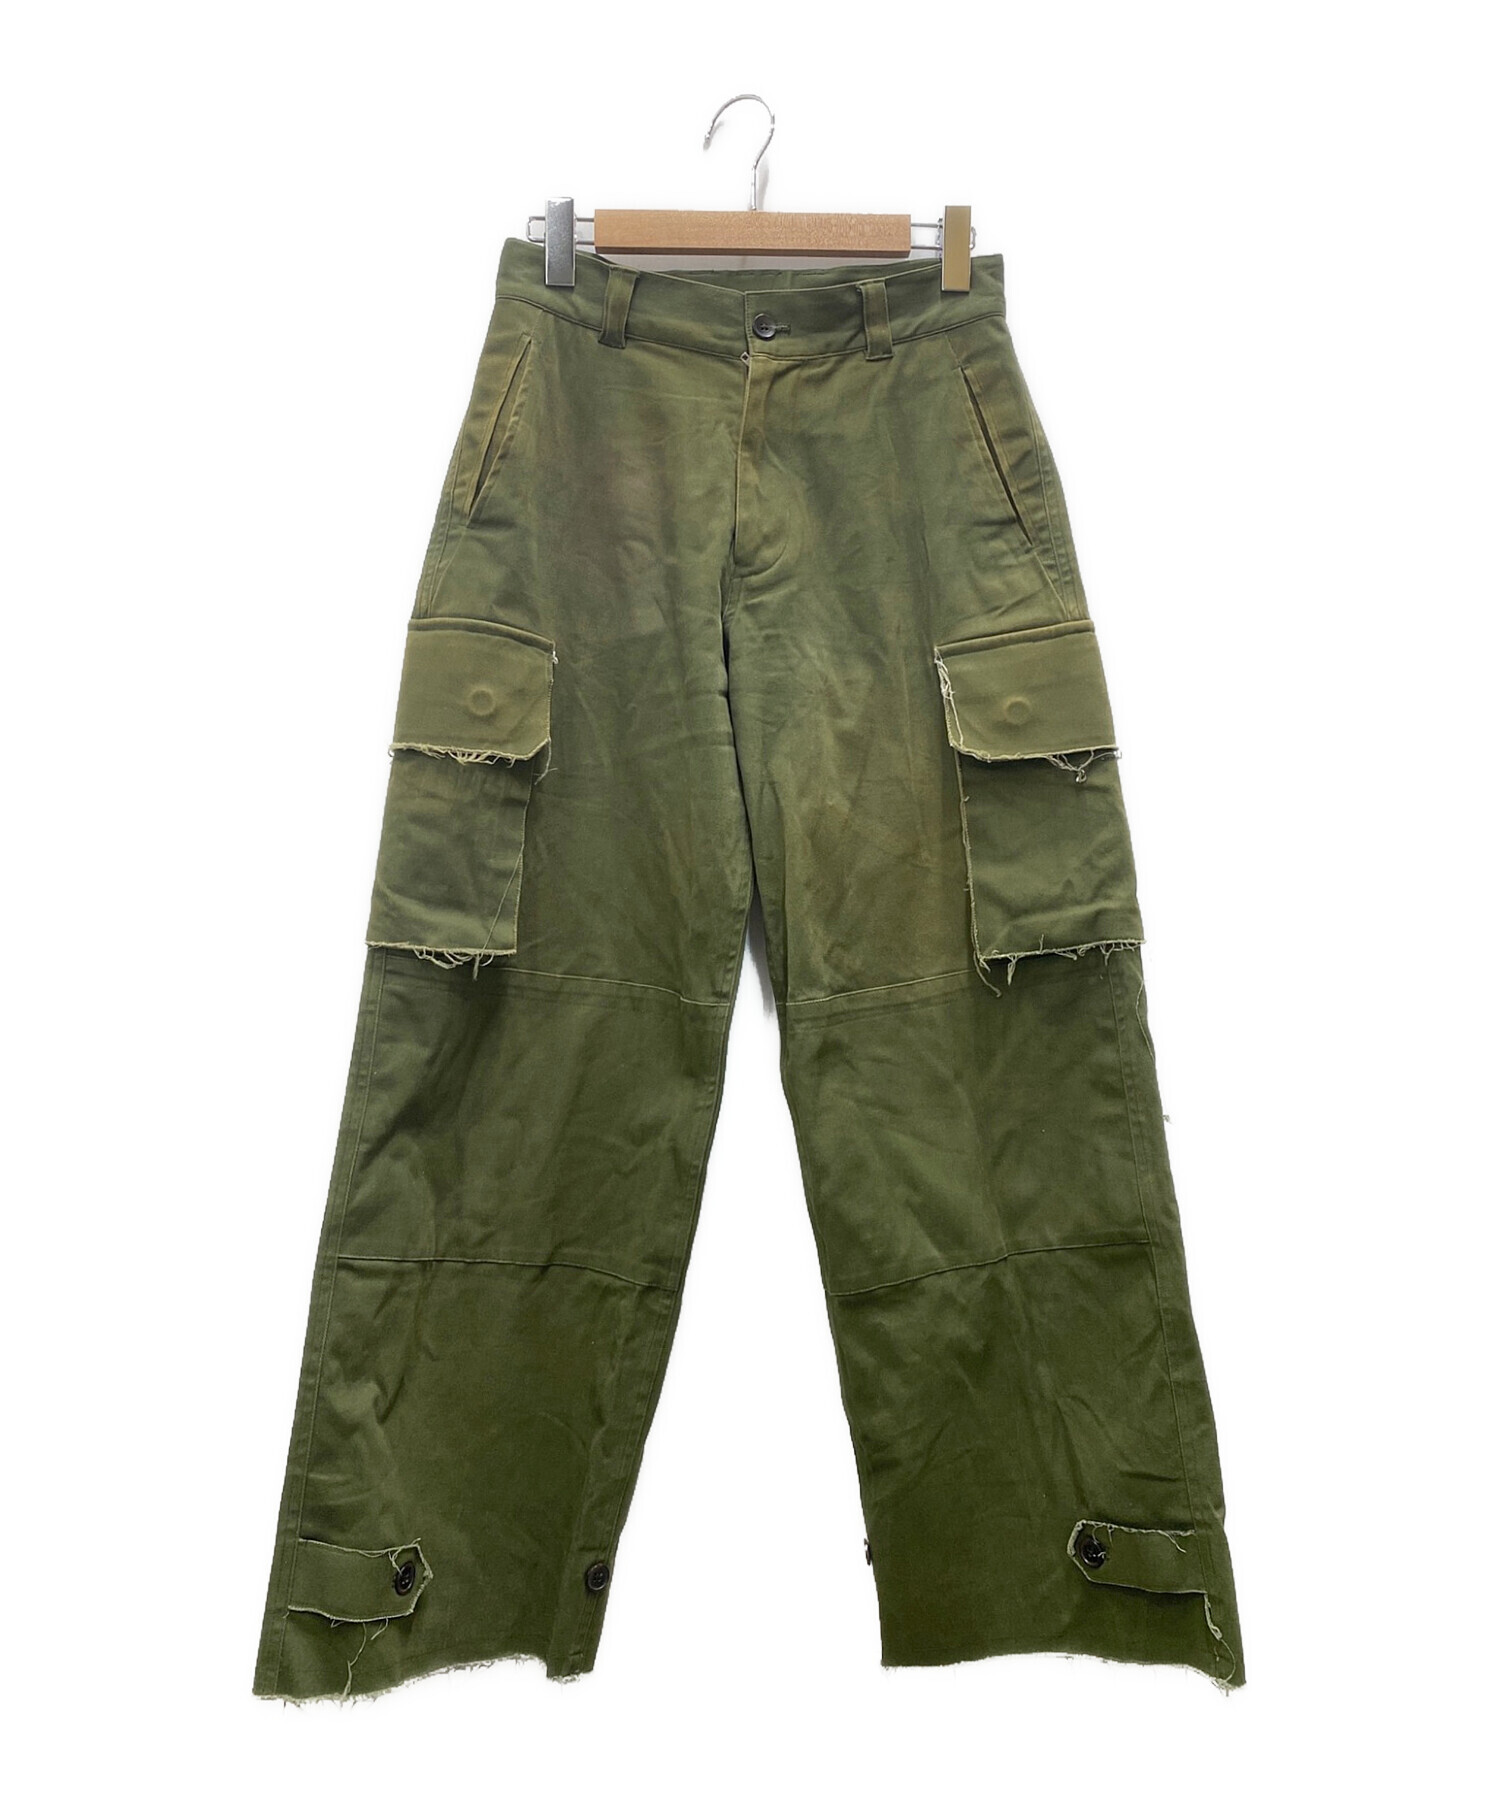 Wide straight military pants